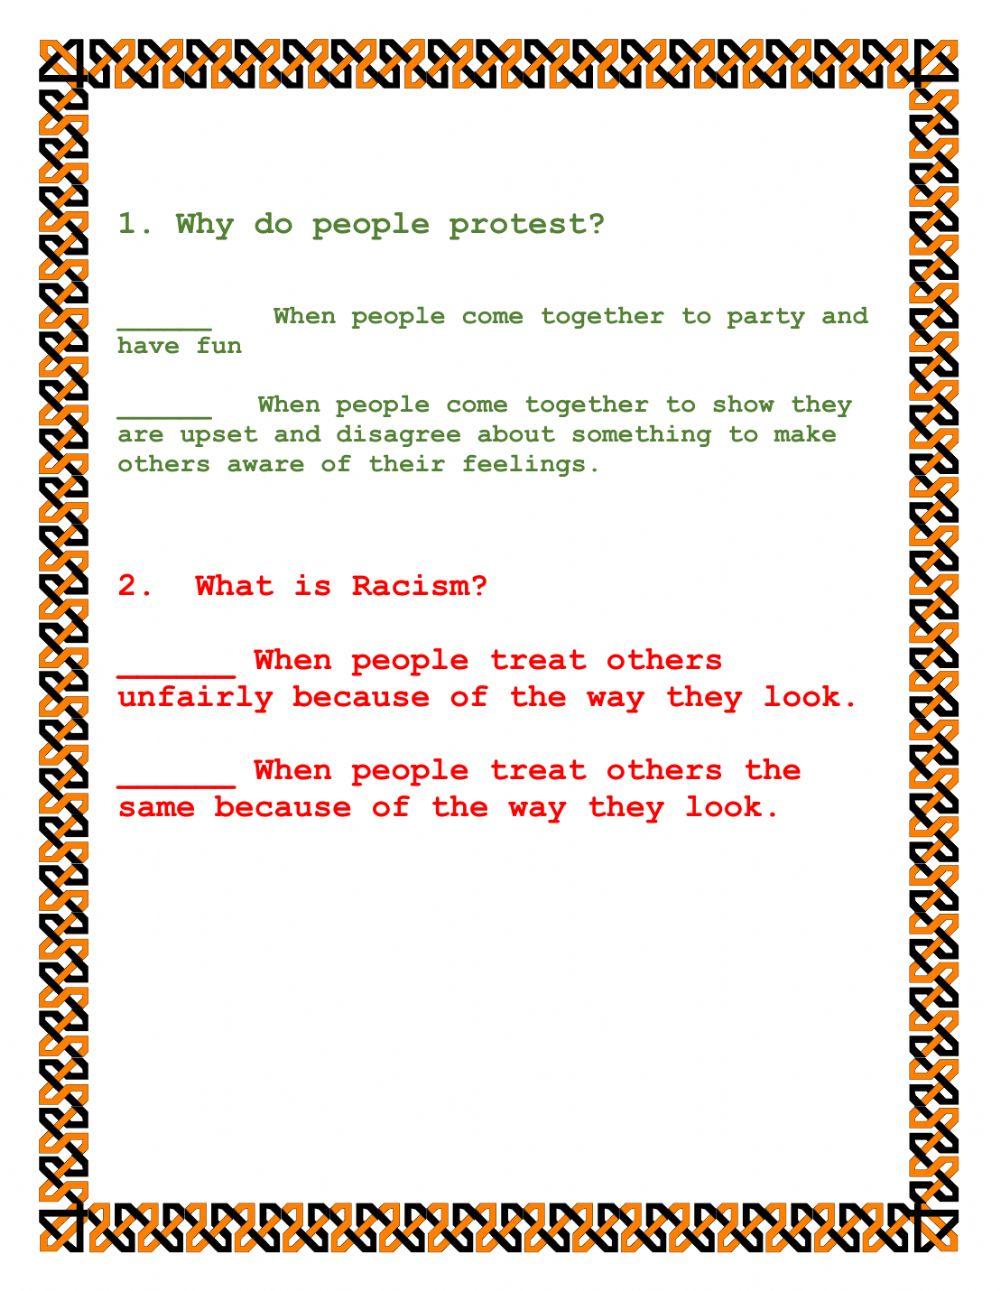 Racism: Why do people protest?